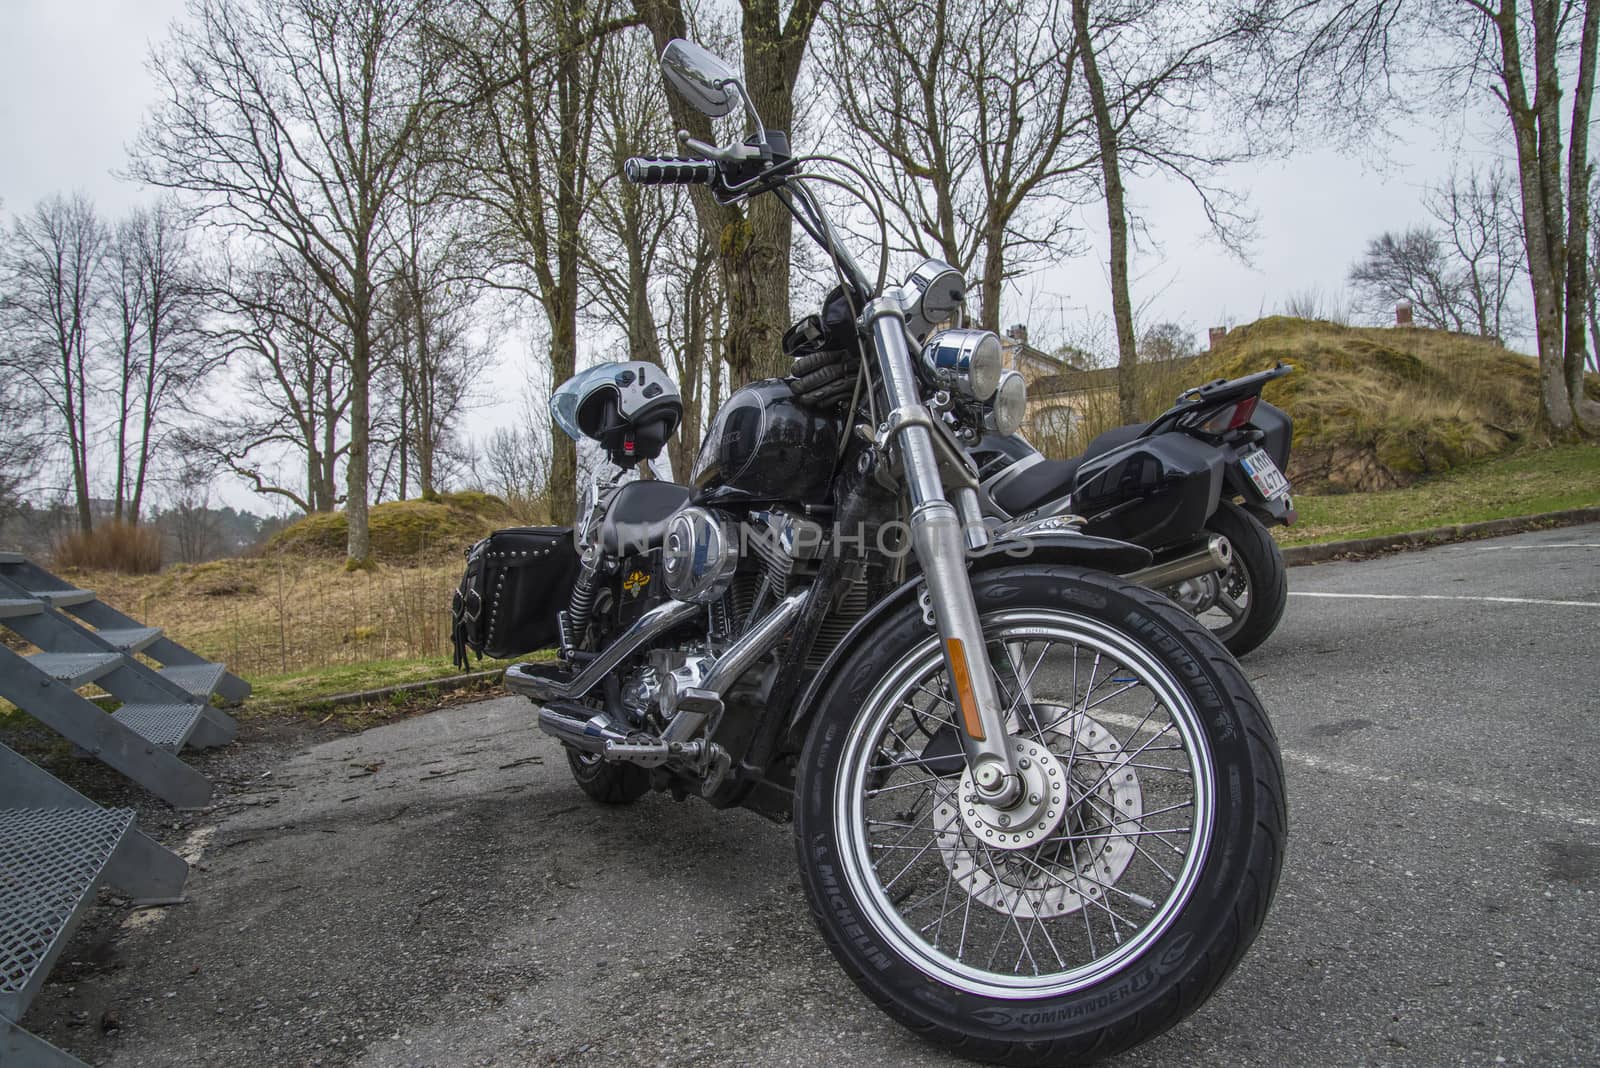 Every year in May there is a motorcycle meeting at Fredriksten fortress in Halden, Norway. In this photo Harley Davidson